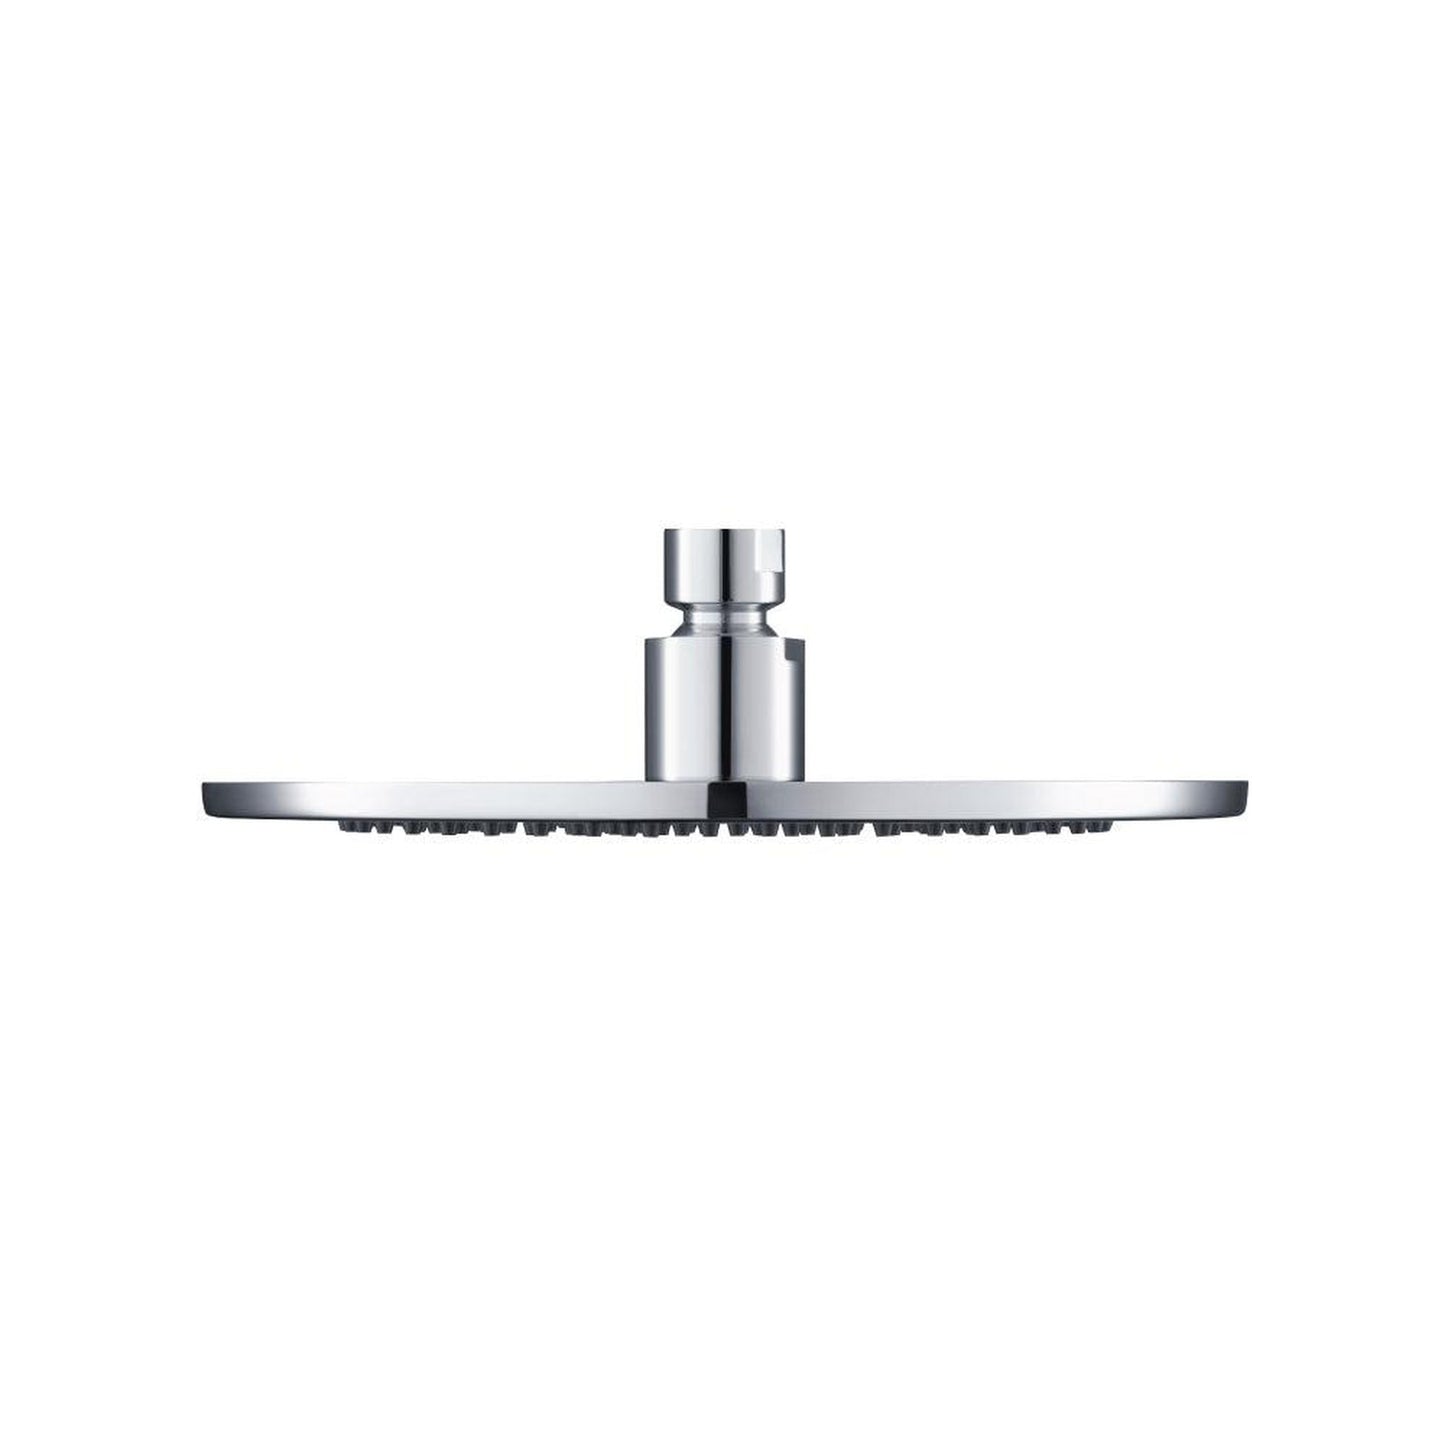 Isenberg Serie 100 Single Output Chrome Wall-Mounted Shower Set With Single Function Round Rain Shower Head, Two-Handle Shower Trim and 1-Output Wall-Mounted Thermostatic Shower Valve With Integrated Volume Control